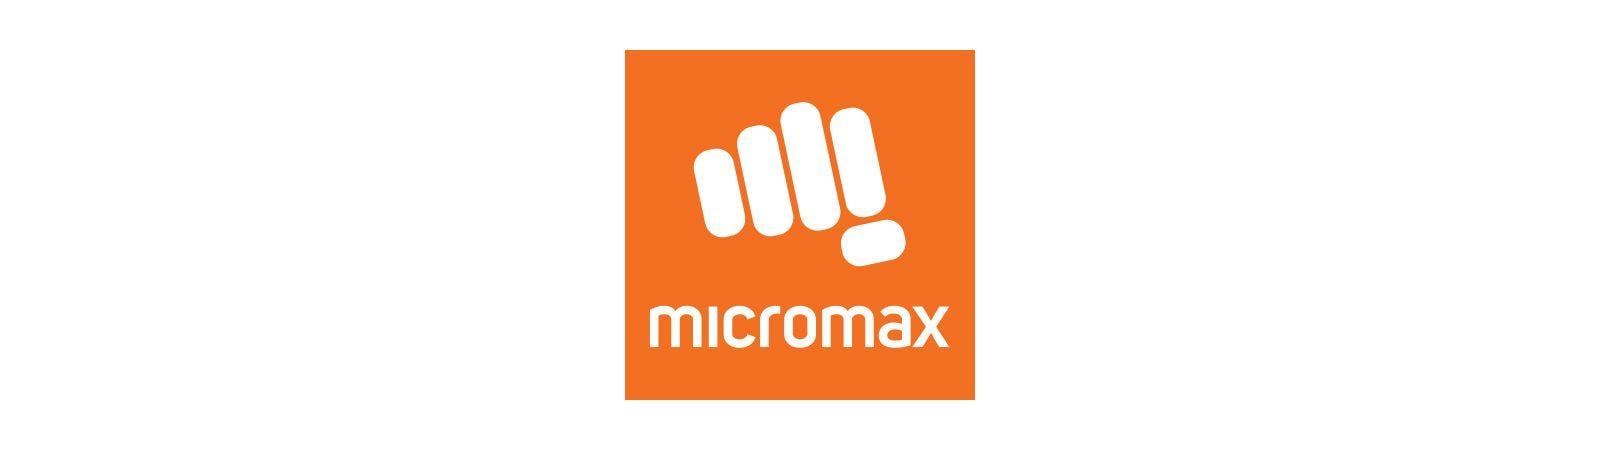 Micromax Logo - Micromax Informatics | Technology Sector | TA | A Private Equity Firm